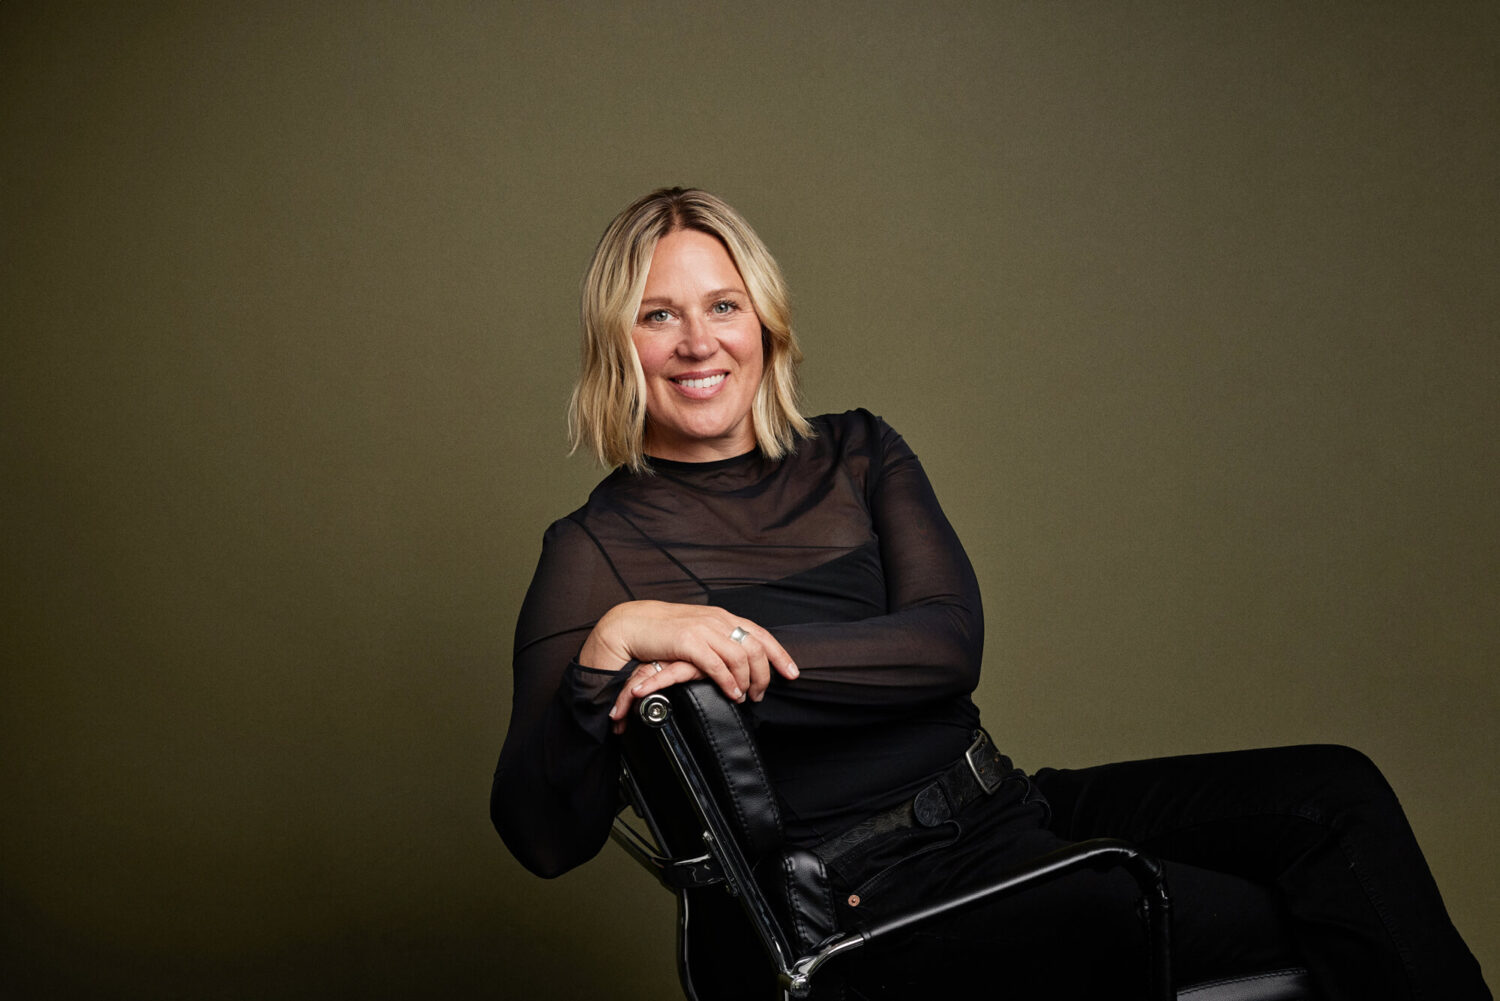 Portrait by Photoform*. Woman is smiling at the camera and she's sitting on a leather black chair.
She's wearing all black and has blonde hair.  She's against an olive coloured background/